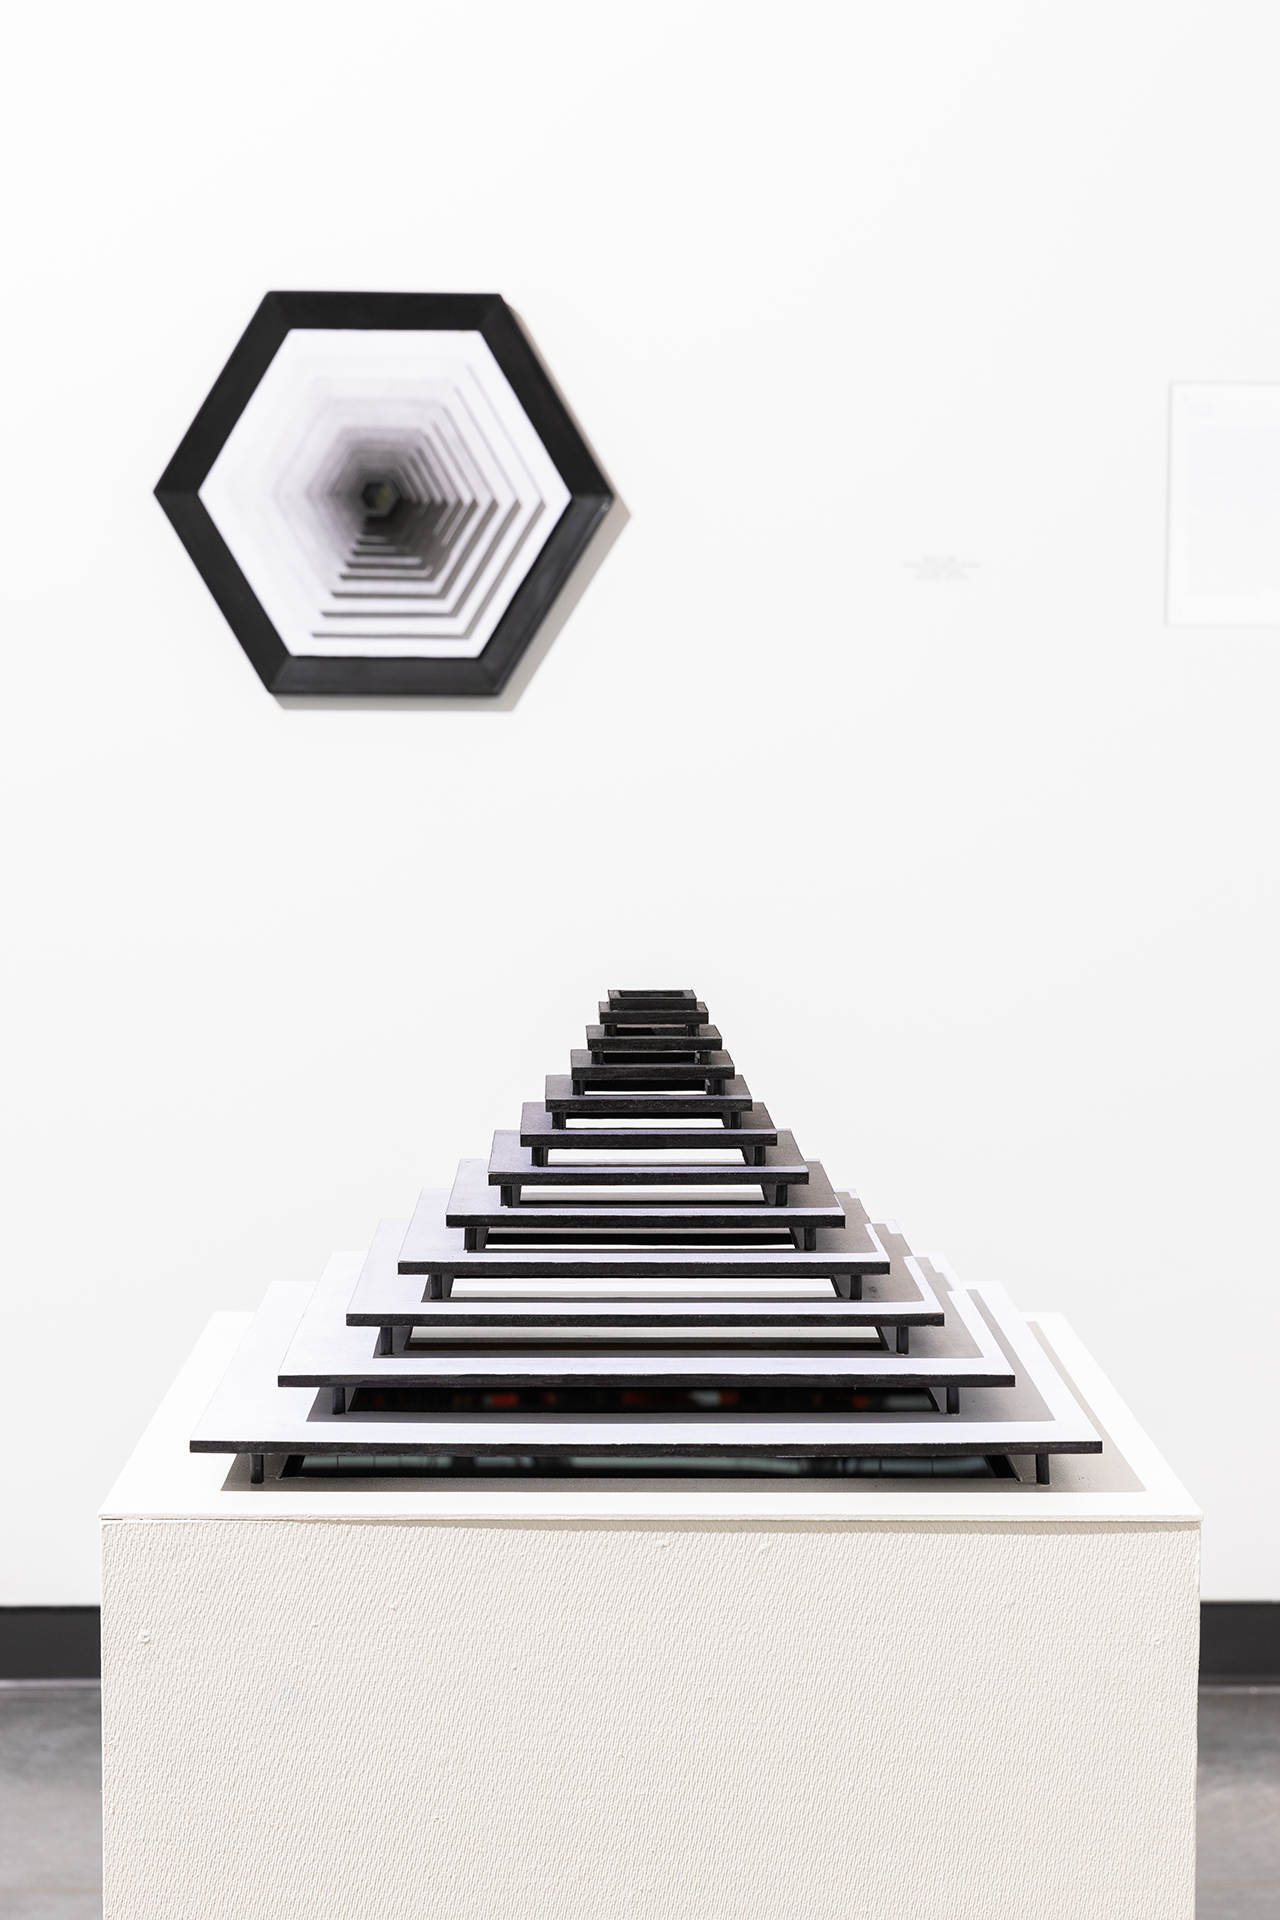 Paradox of Perception; Hexagon and Cube installation.